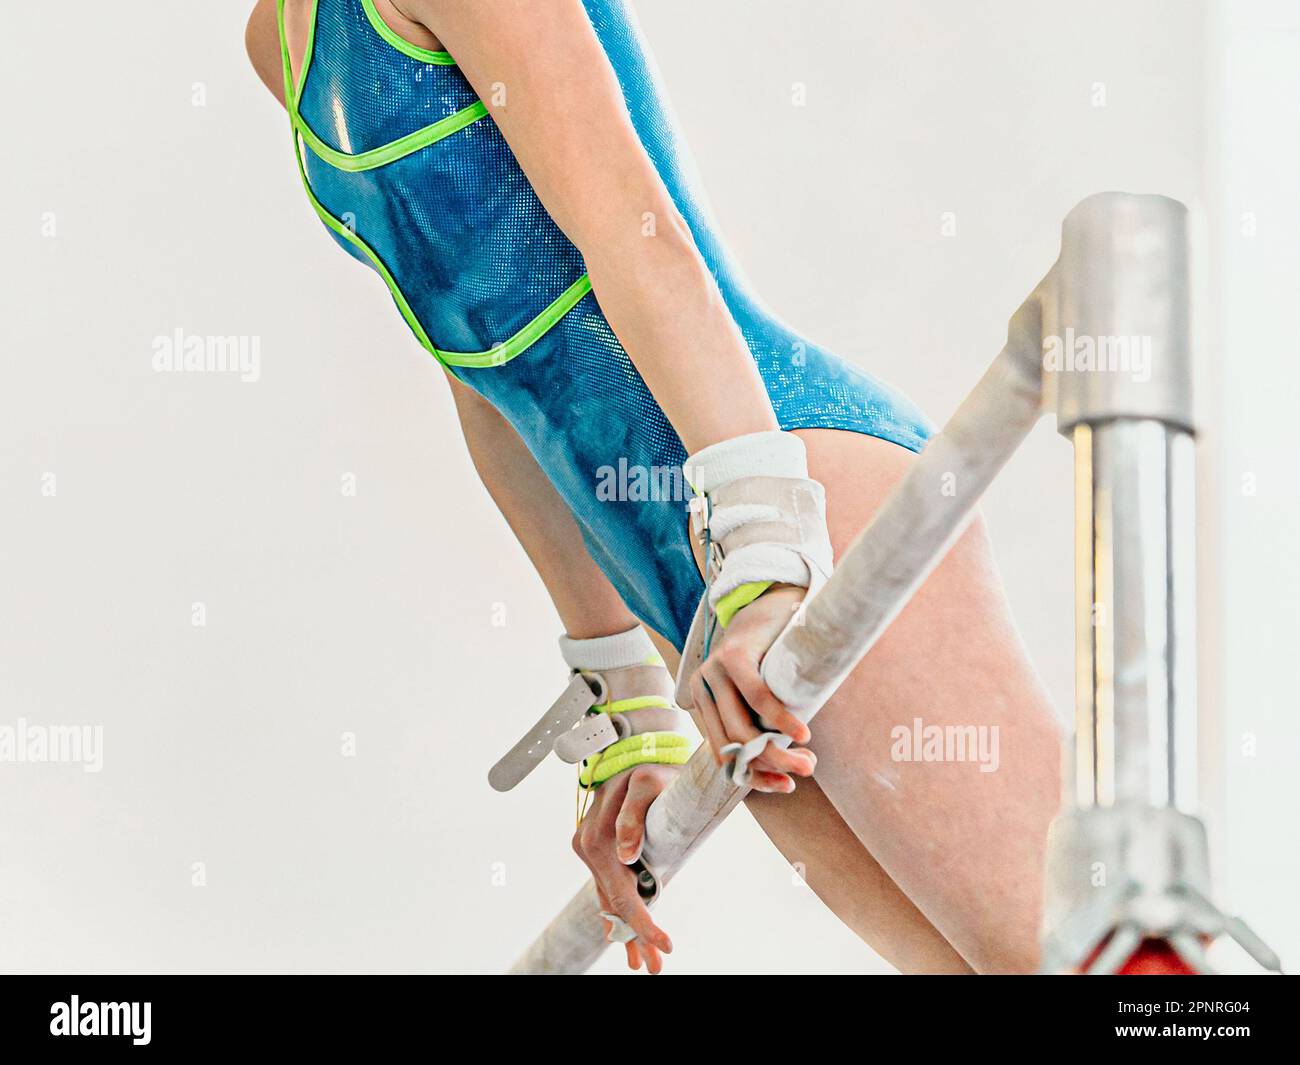 close-up girl gymnast on uneven bars in artistic gymnastics, light background, blue swimsuit and hands grips Stock Photo